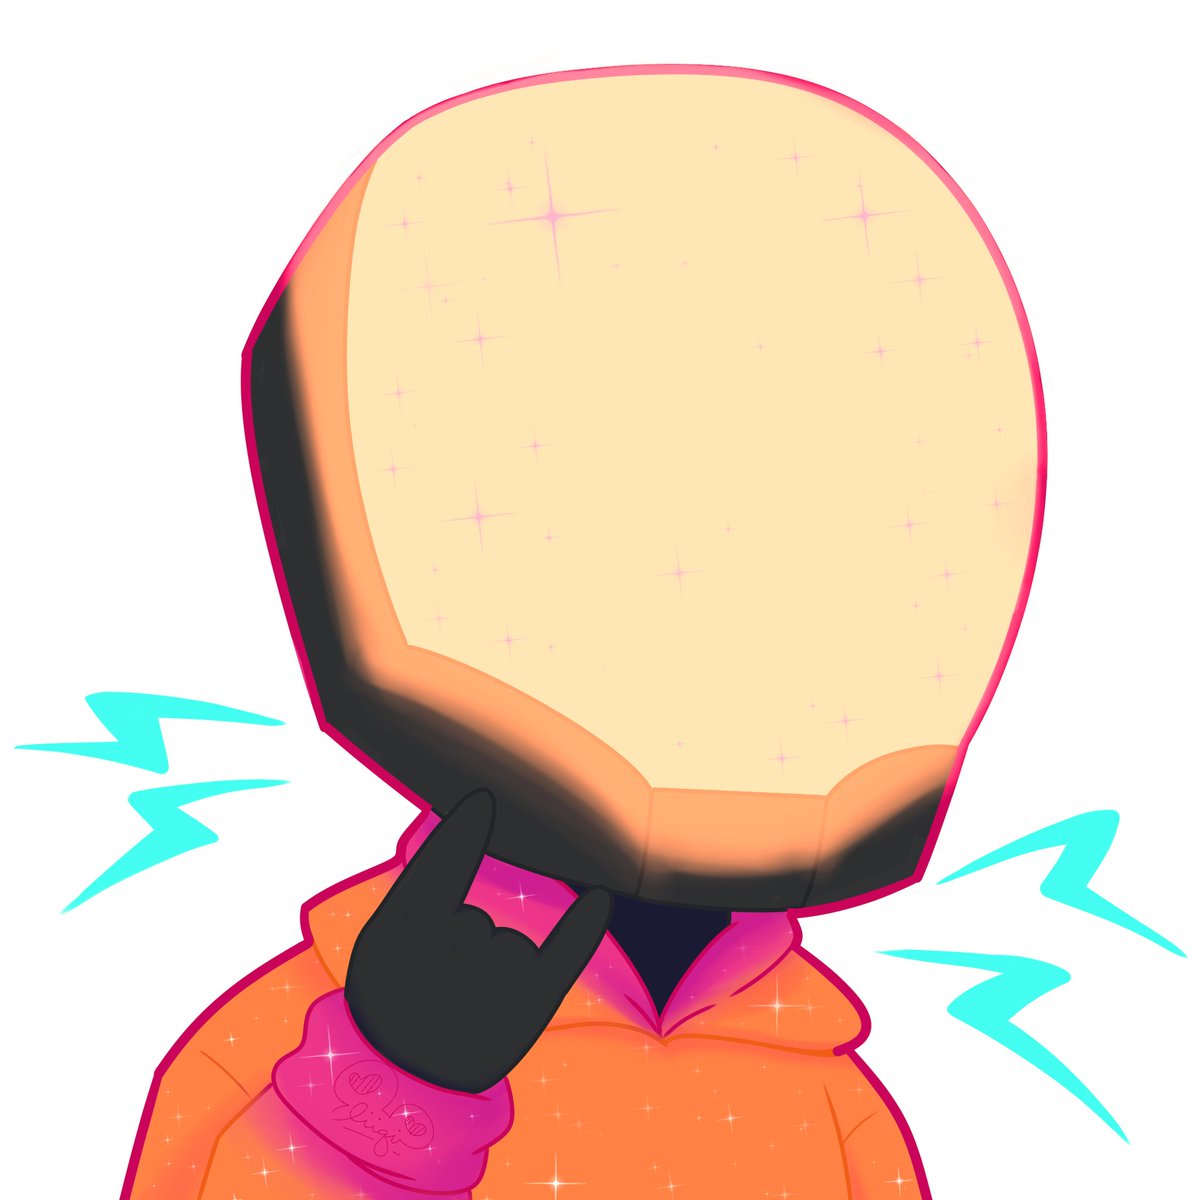 𝘾𝙤𝙢𝙥𝙚𝙩𝙞𝙩𝙞𝙤𝙣 𝙩𝙞𝙢𝙚?

I'm doing a competition right now! If you draw something on my helmet that I like enough I'll make it a redeem on my chibi model! 

Original art is by Liiqi_peach btw!
The helmet to use:

⁞ #ENVtuber  • #Vtuber   • #pathtopartner •…